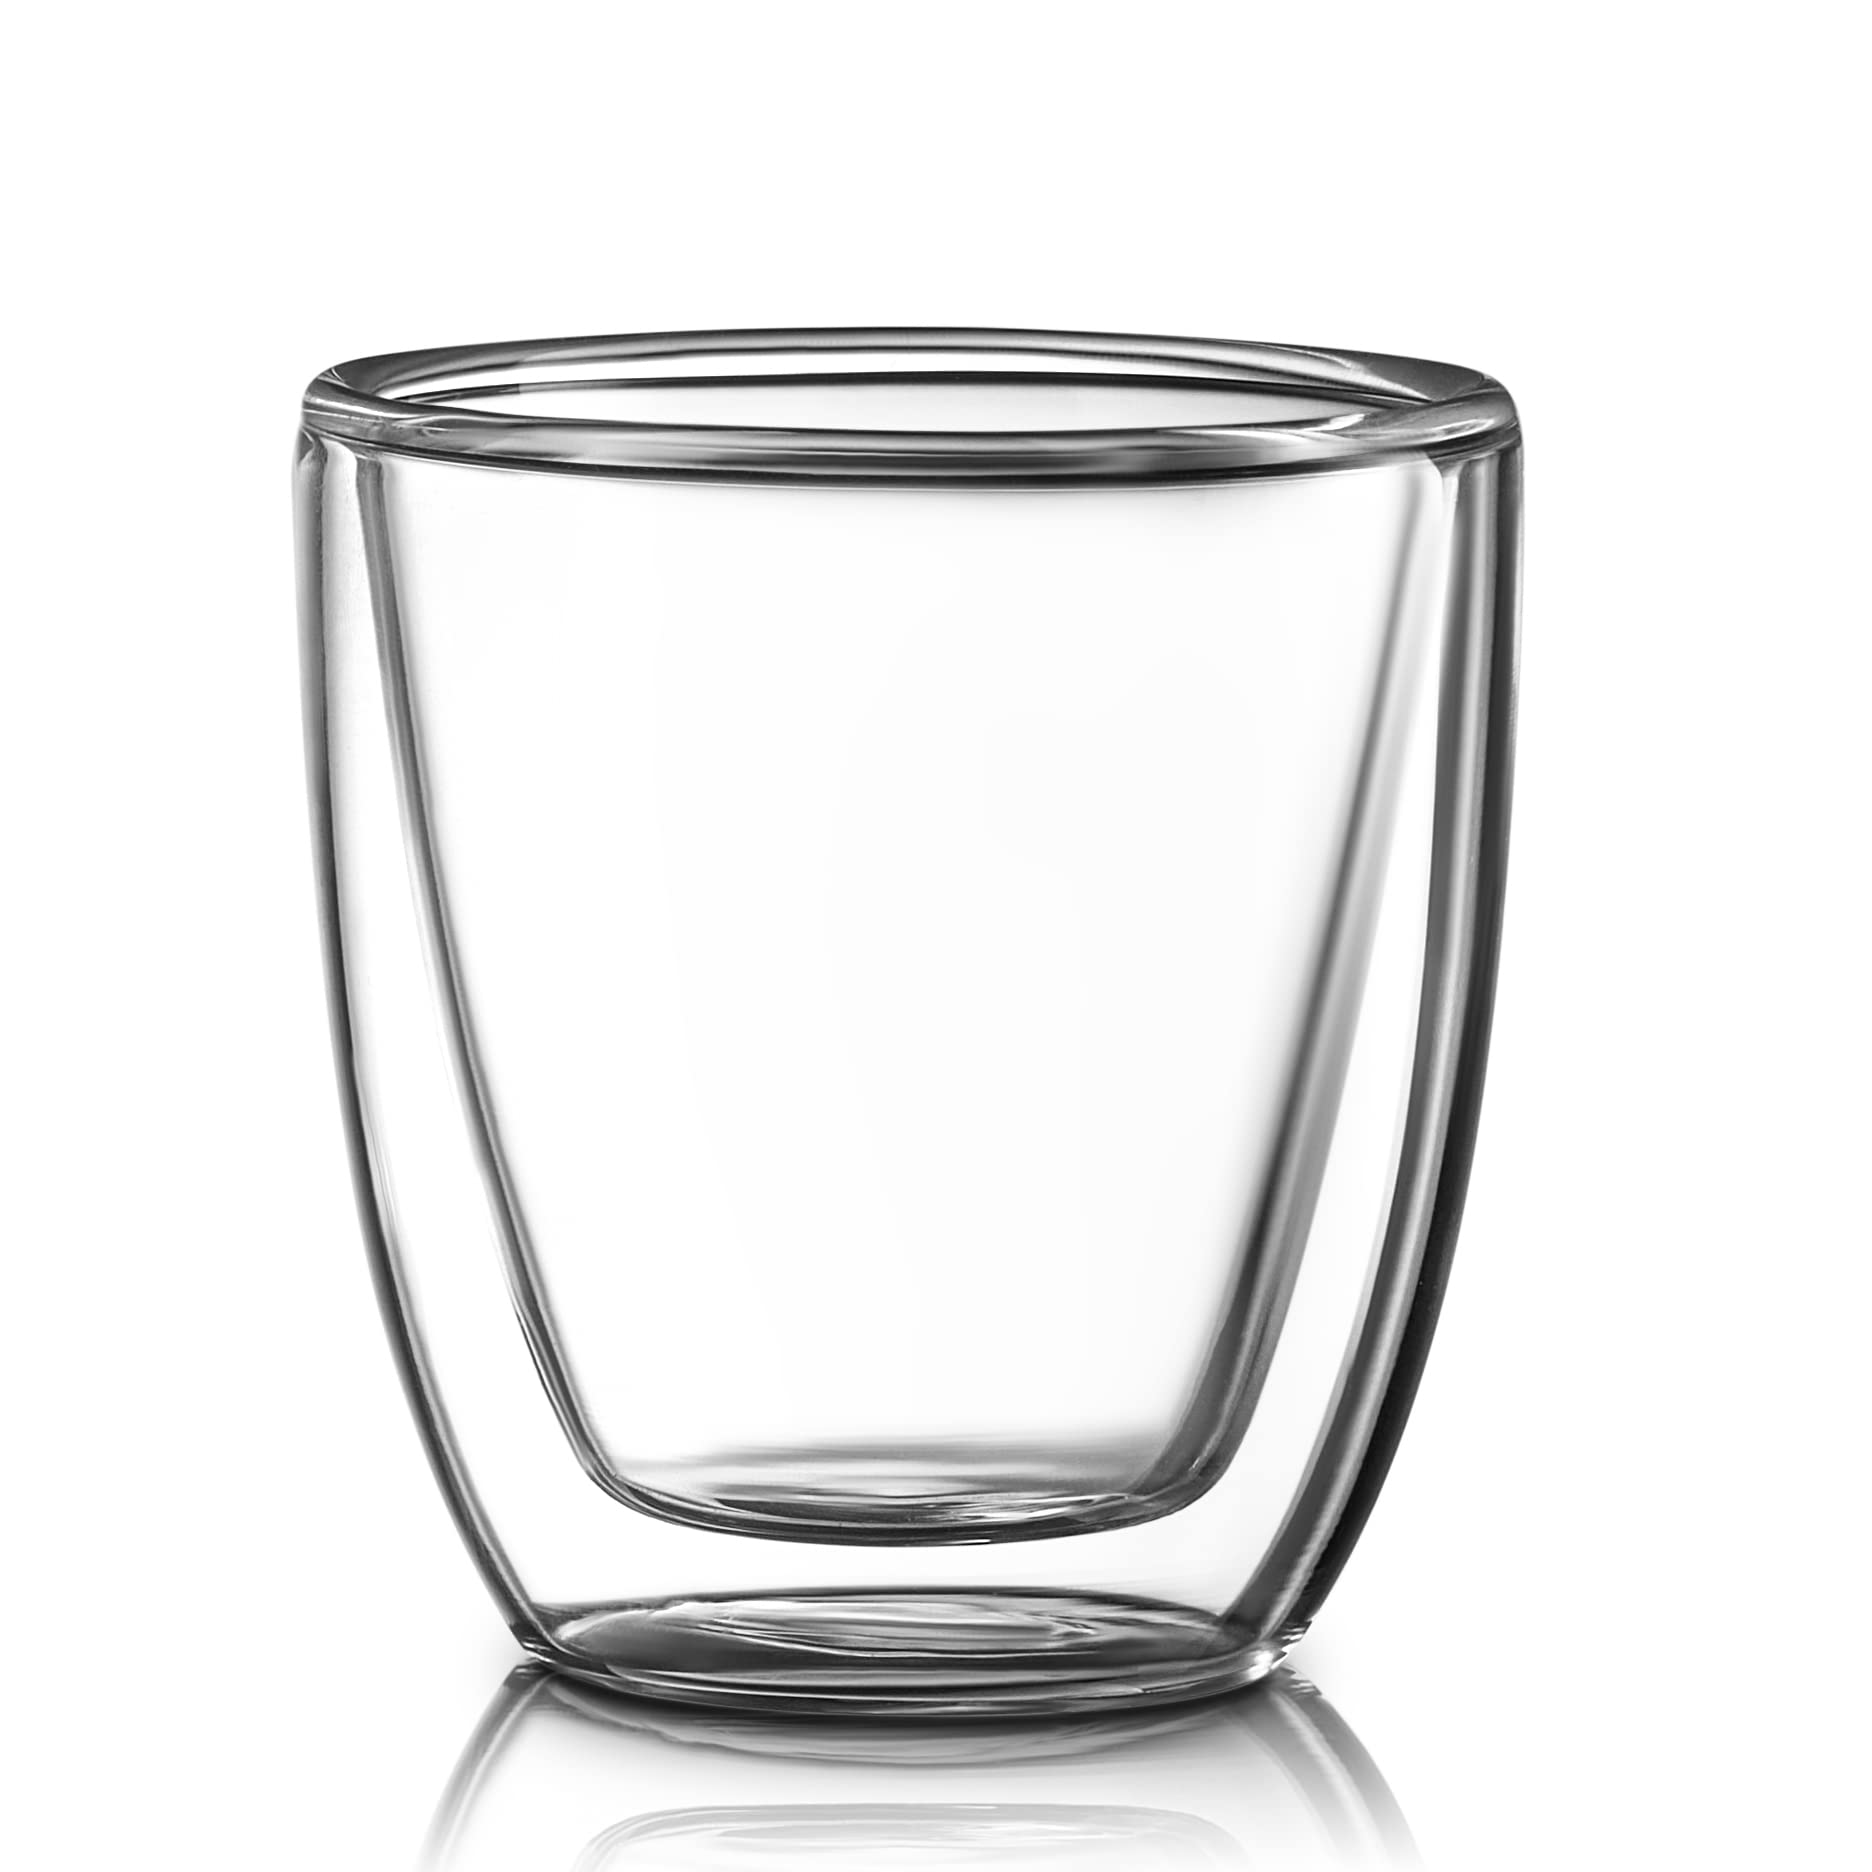 Glass Espresso Cups Set of 4 - Double Walled Espresso Cups 2.7 OZ - Wide Italian Style Clear Doppio Espresso Cup - Double Espresso Cups - Espresso Accessories Small Double Wall Expresso Coffee Cup